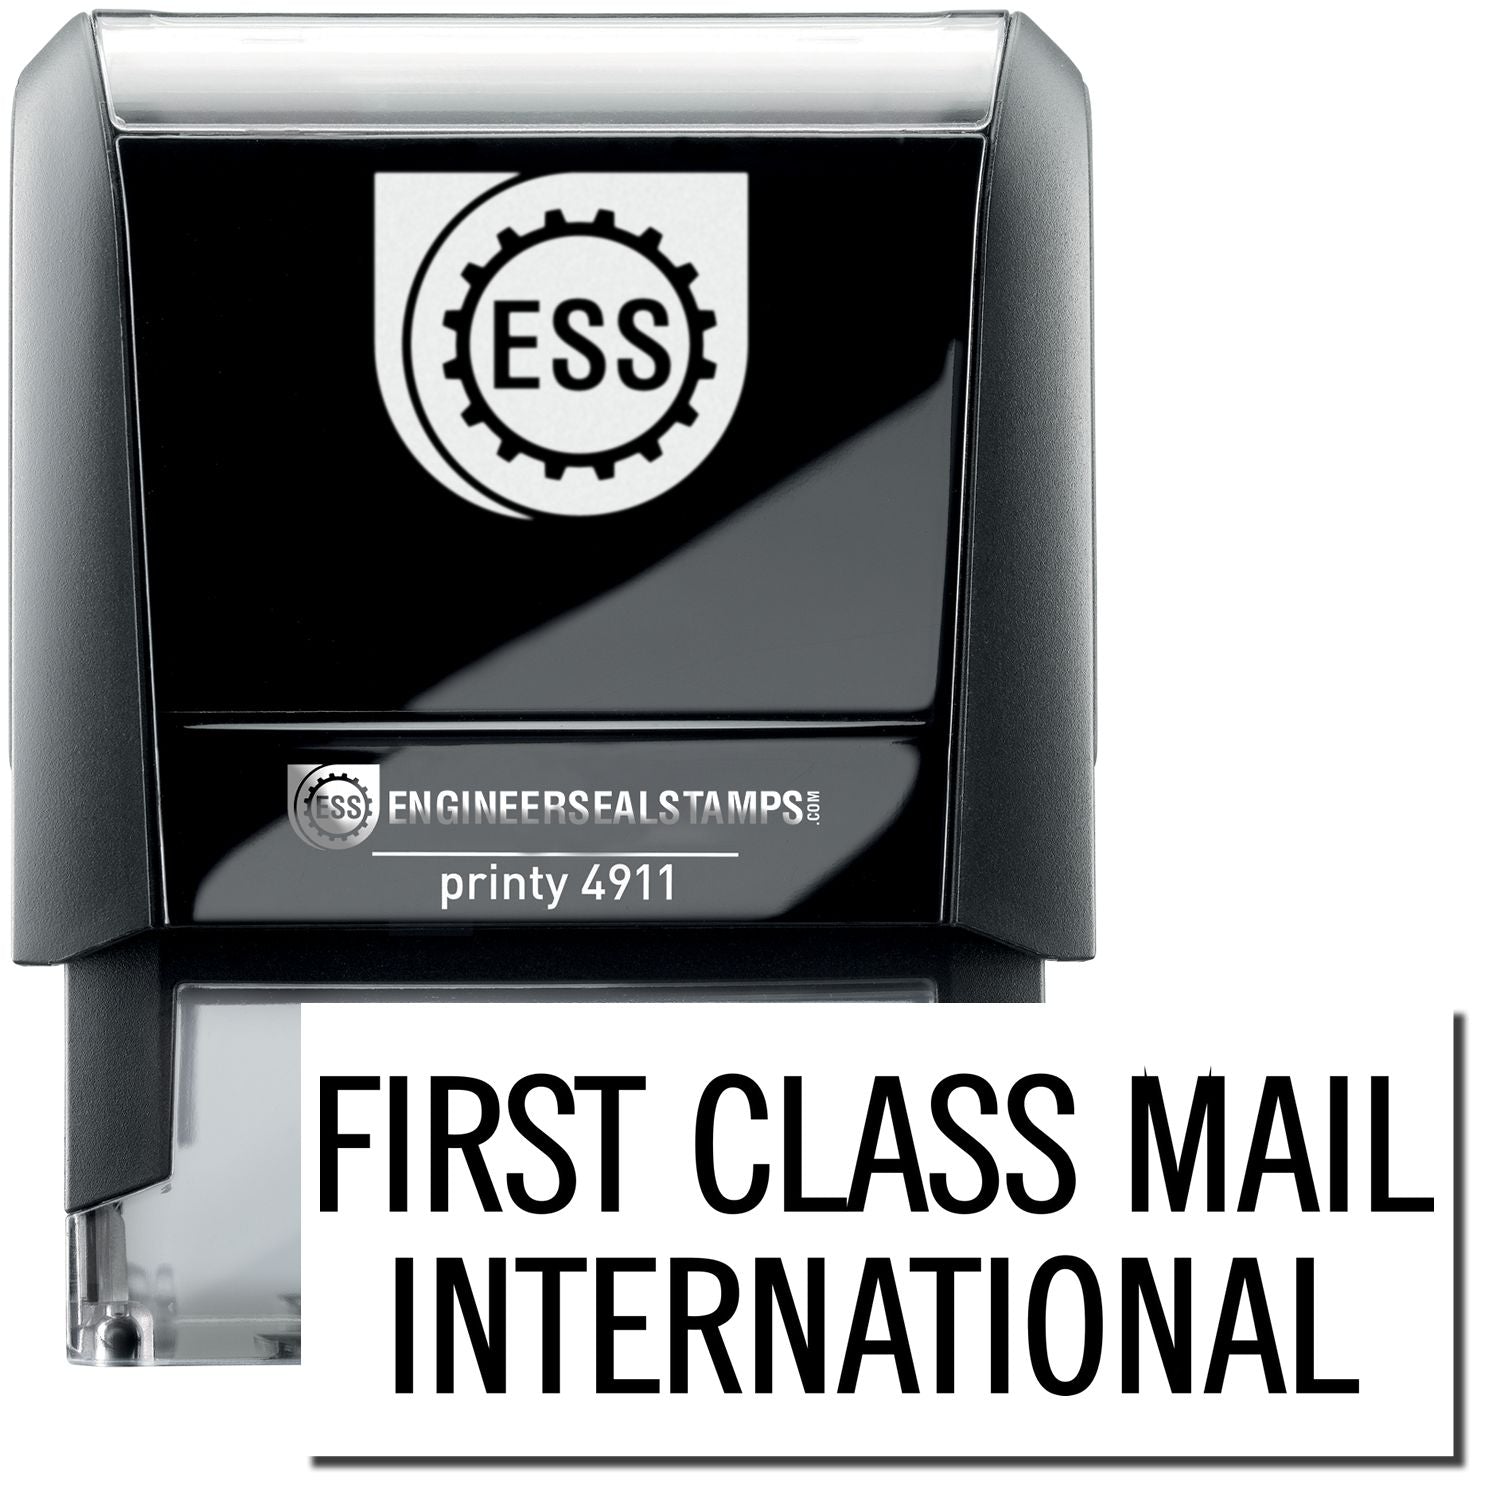 A self-inking stamp with a stamped image showing how the text "FIRST CLASS MAIL INTERNATIONAL" is displayed after stamping.